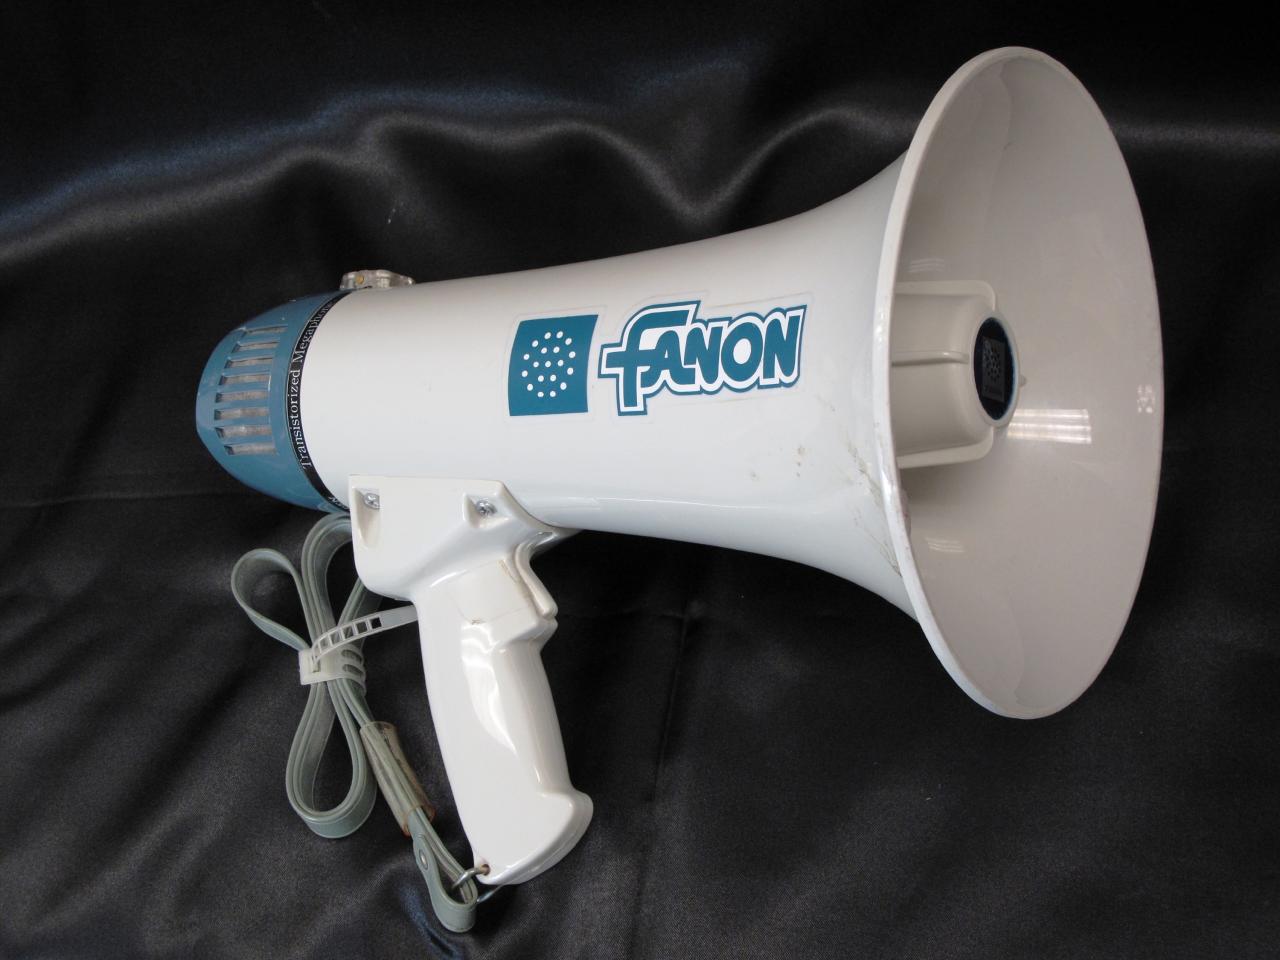 From our artifact collection: The Fanon MP-5 bullhorn President George W. Bush used to speak to the first responders working at Ground Zero when he visited New York City on September 14, 2001. DO.203303 